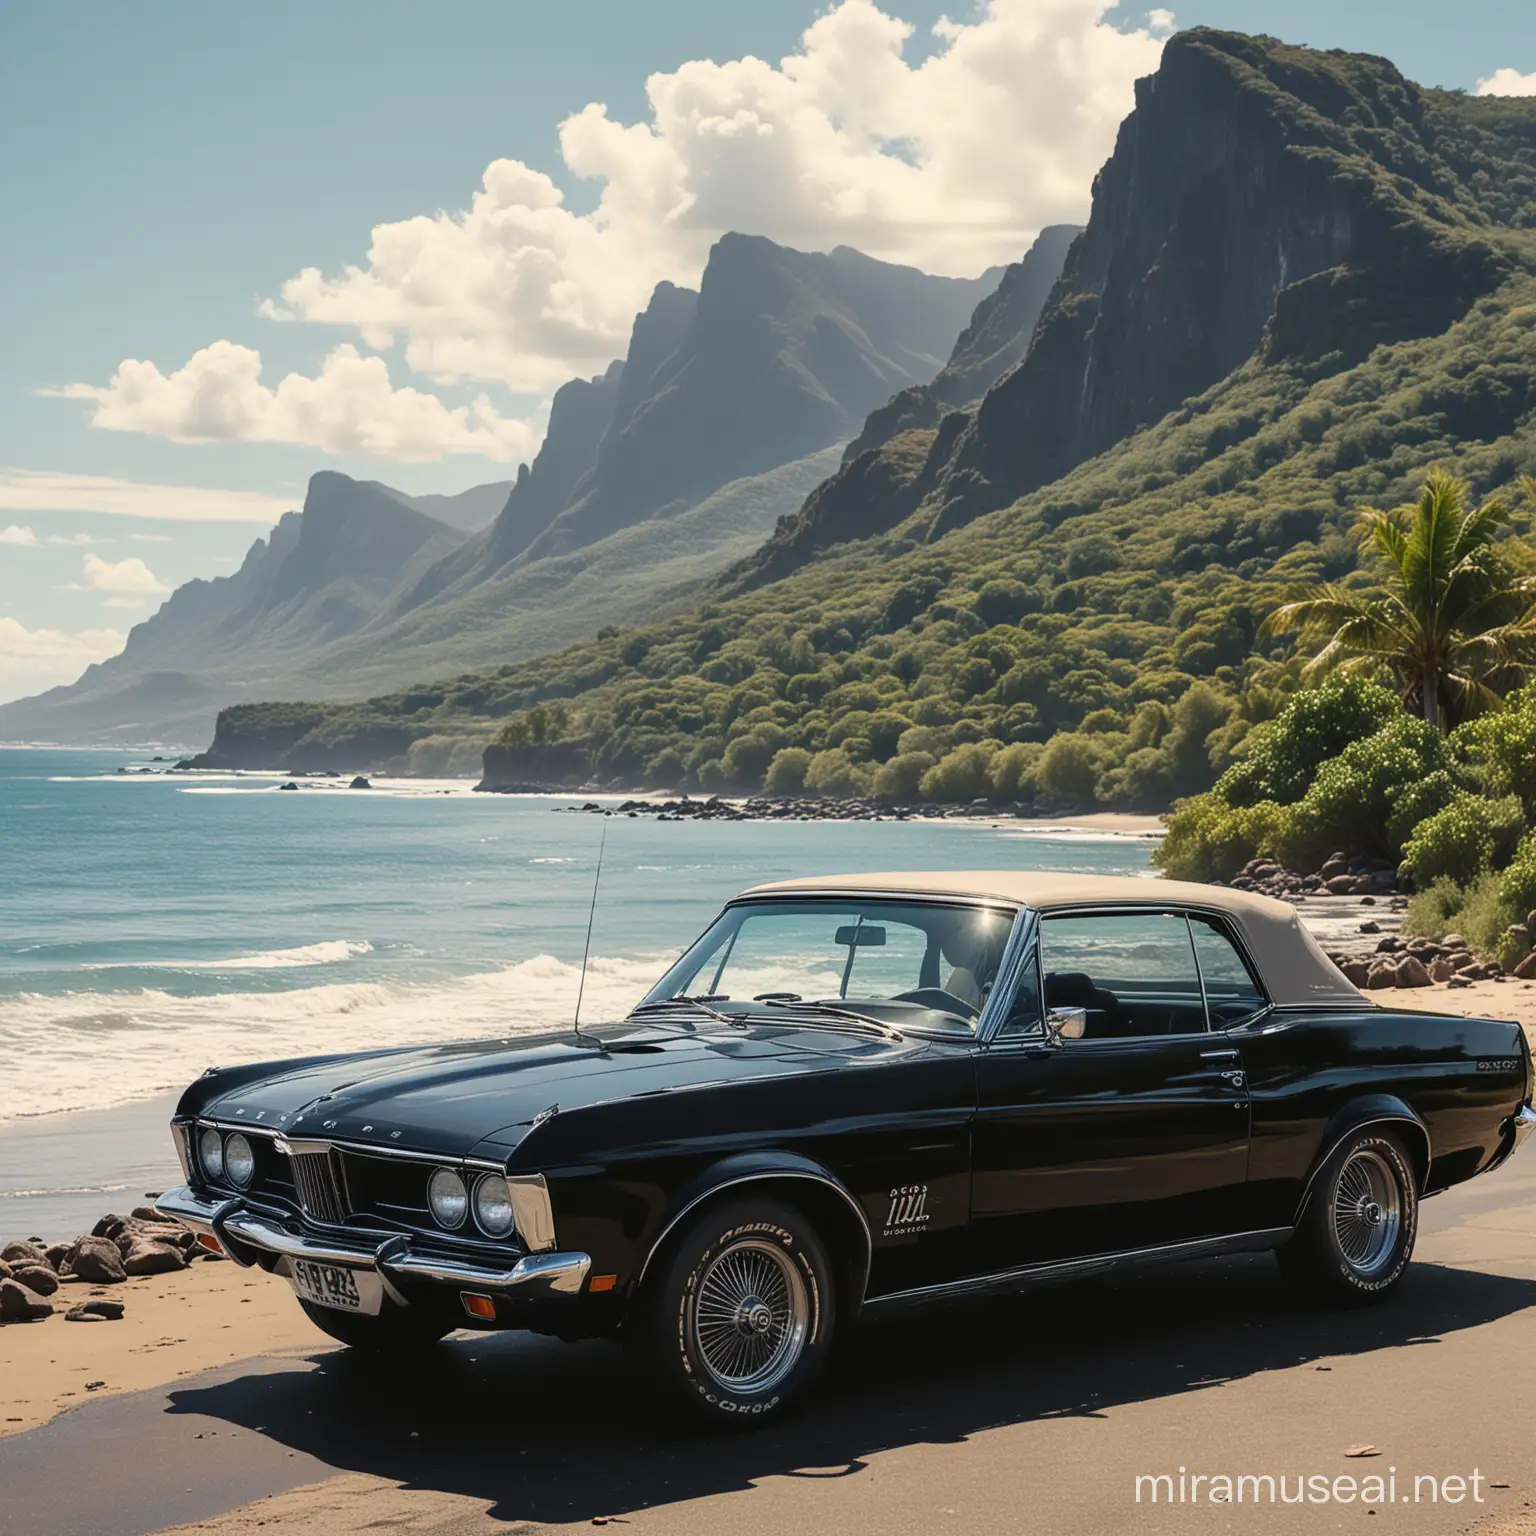 The image is of a black Cougar car parked outdoors. It is a classic muscle car with tags including vehicle, land vehicle, wheel, classic car, transport, muscle car, auto part, tire, bumper, hardtop, grille, road, and outdoor.The image features a beach with a body of water and mountains in the background. The setting includes a tropical landscape with a clear sky and potentially some clouds. This coastal scene captures the beauty of nature with water, trees, and mountains in view.Mauritius,1967 Mercury Cougar GT.Black woman beautiful face is shown.  The woman's body parts such as chest, thigh, stomach, and abdomen are visible.painterly smooth, extremely sharp detail, finely tuned detail, 8 k, ultra sharp focus, illustration, illustration, art by Ayami Kojima Beautiful Thick Black